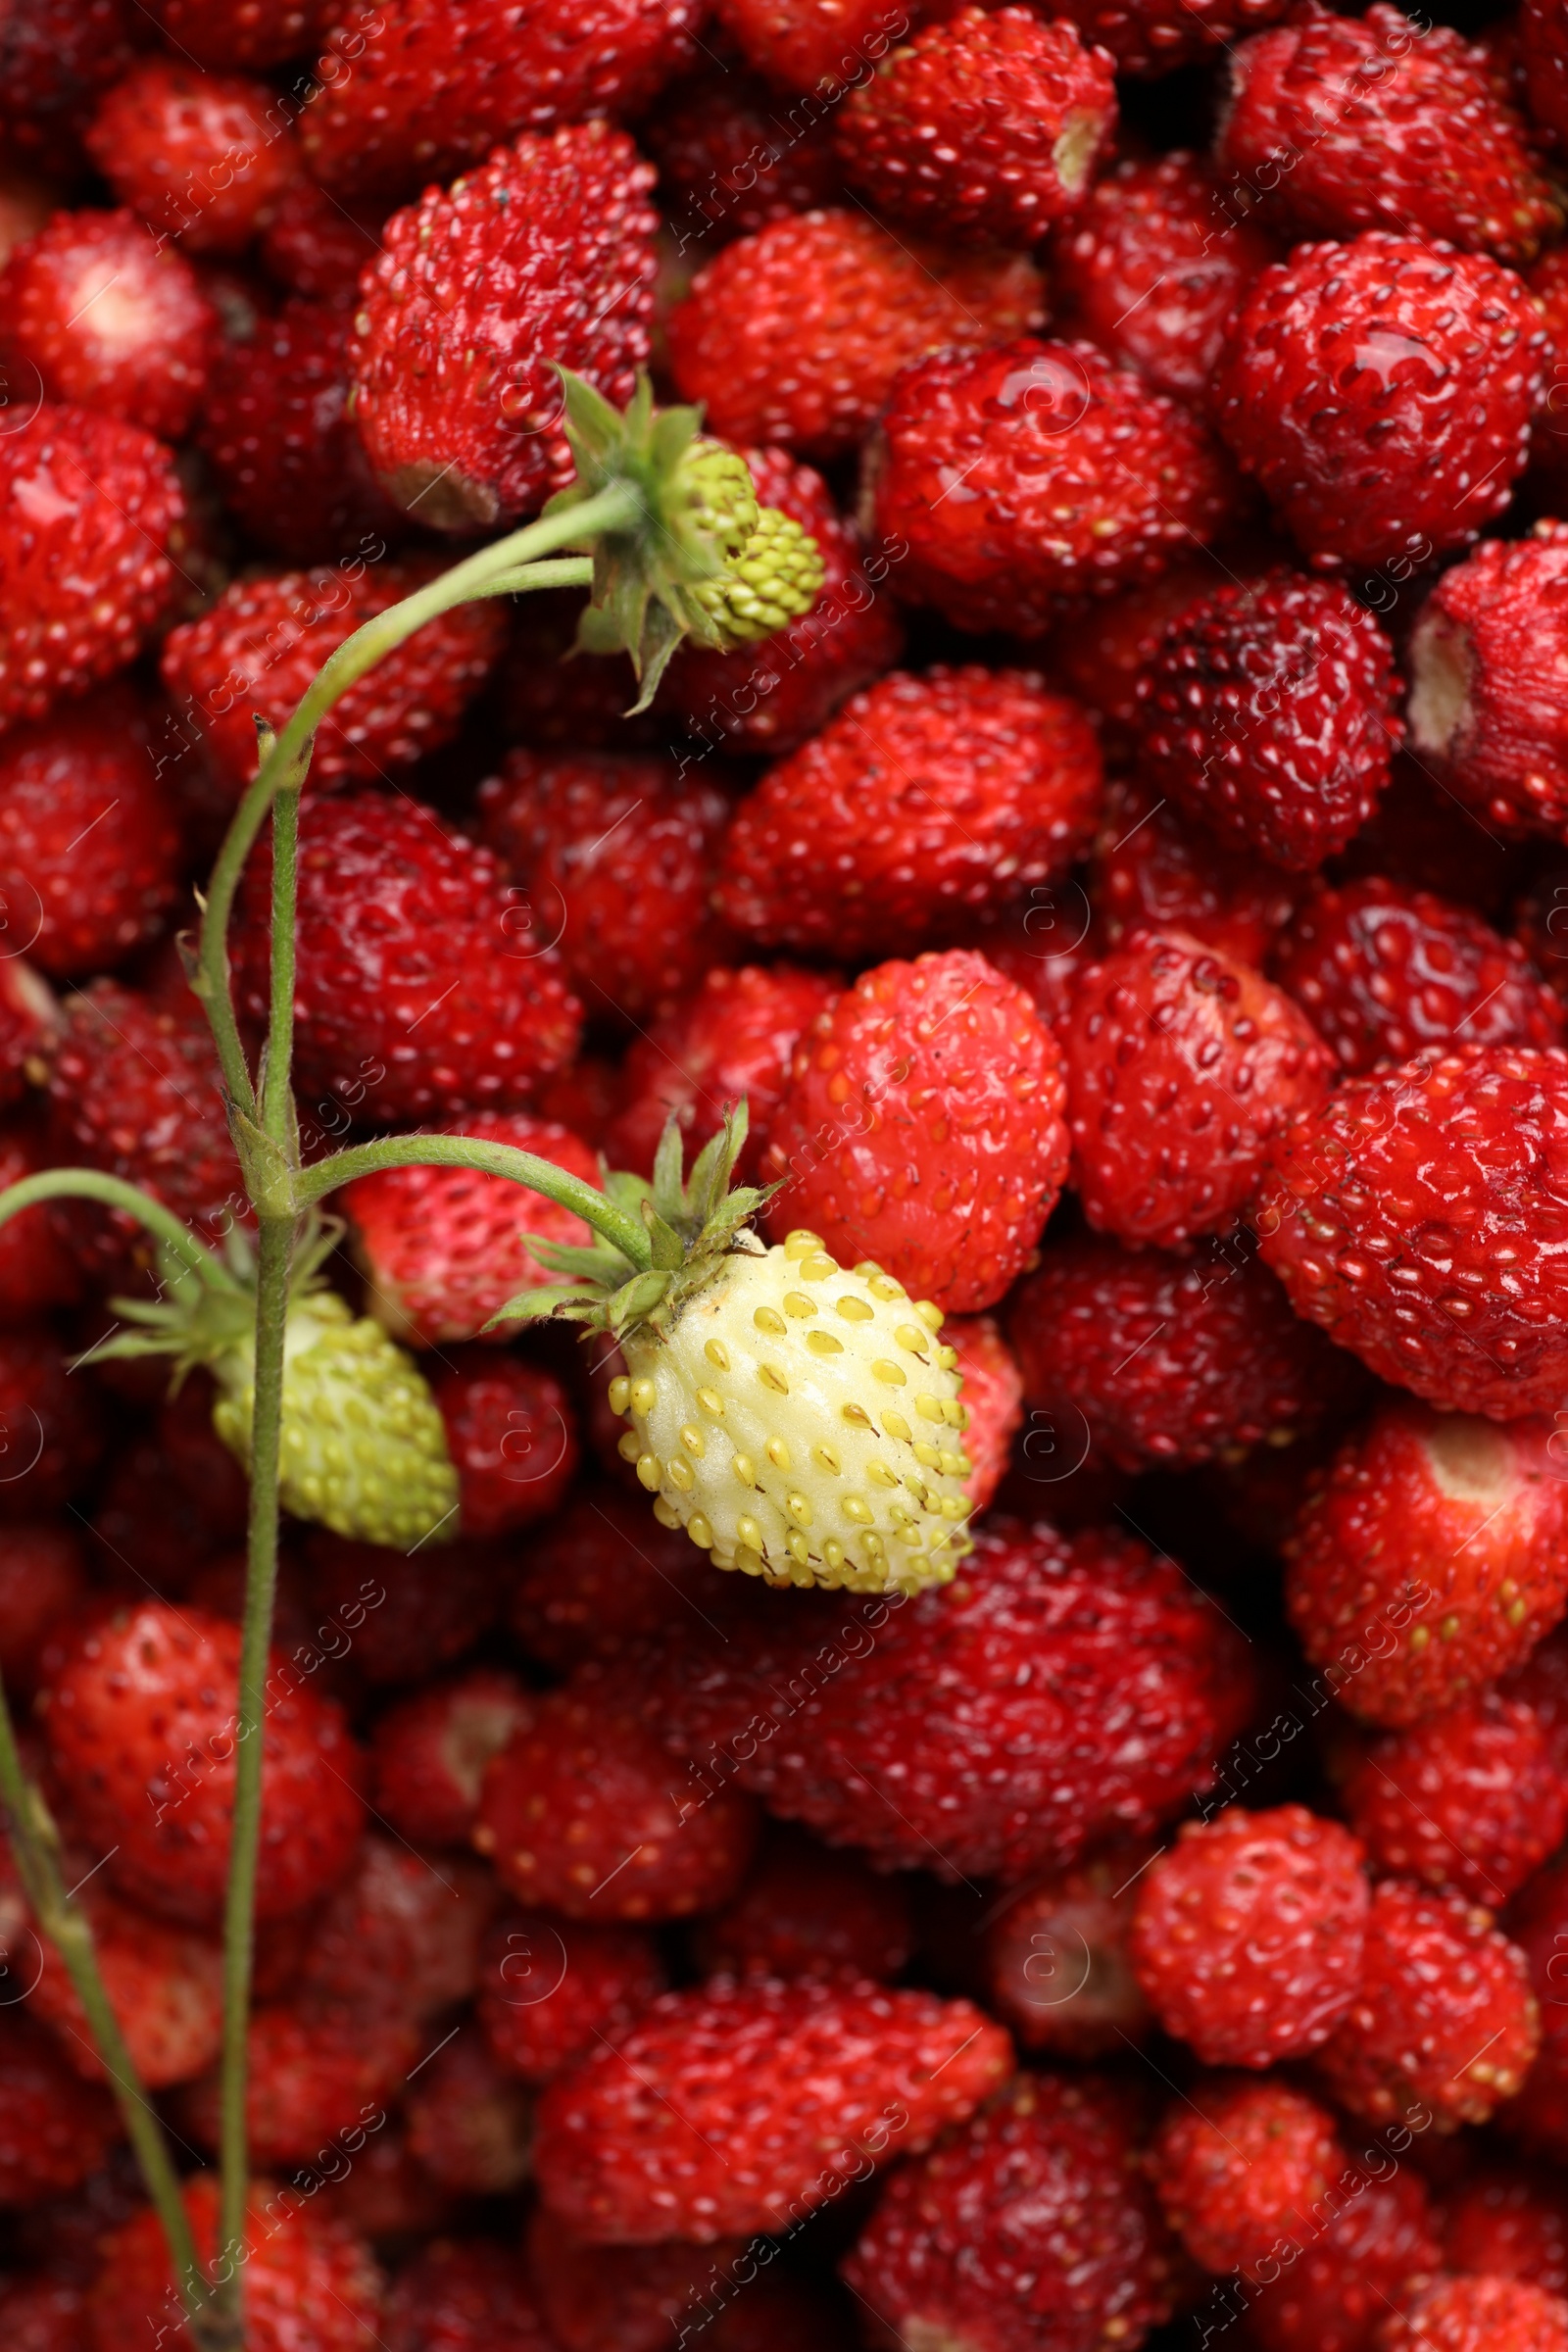 Photo of Many fresh wild strawberries as background, top view